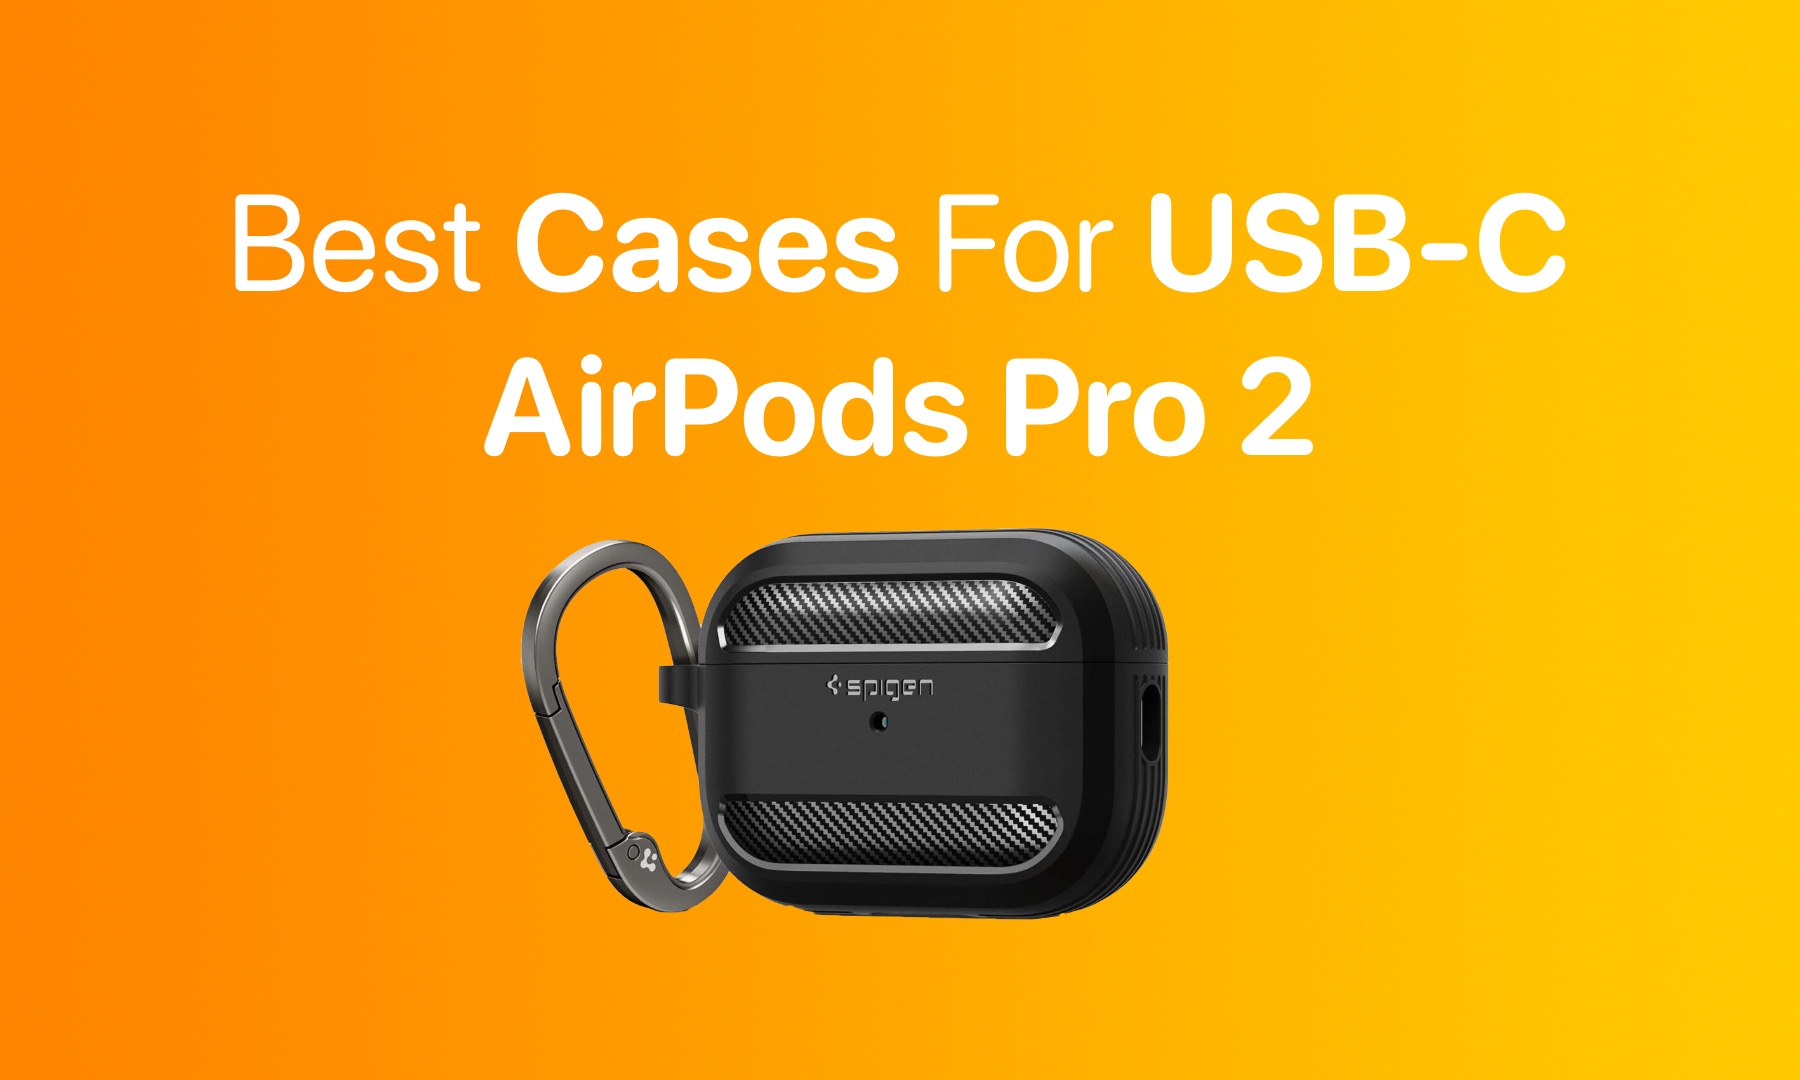 Best AirPods Pro 2 USB-C Cases to Buy Right Now - iOS Hacker